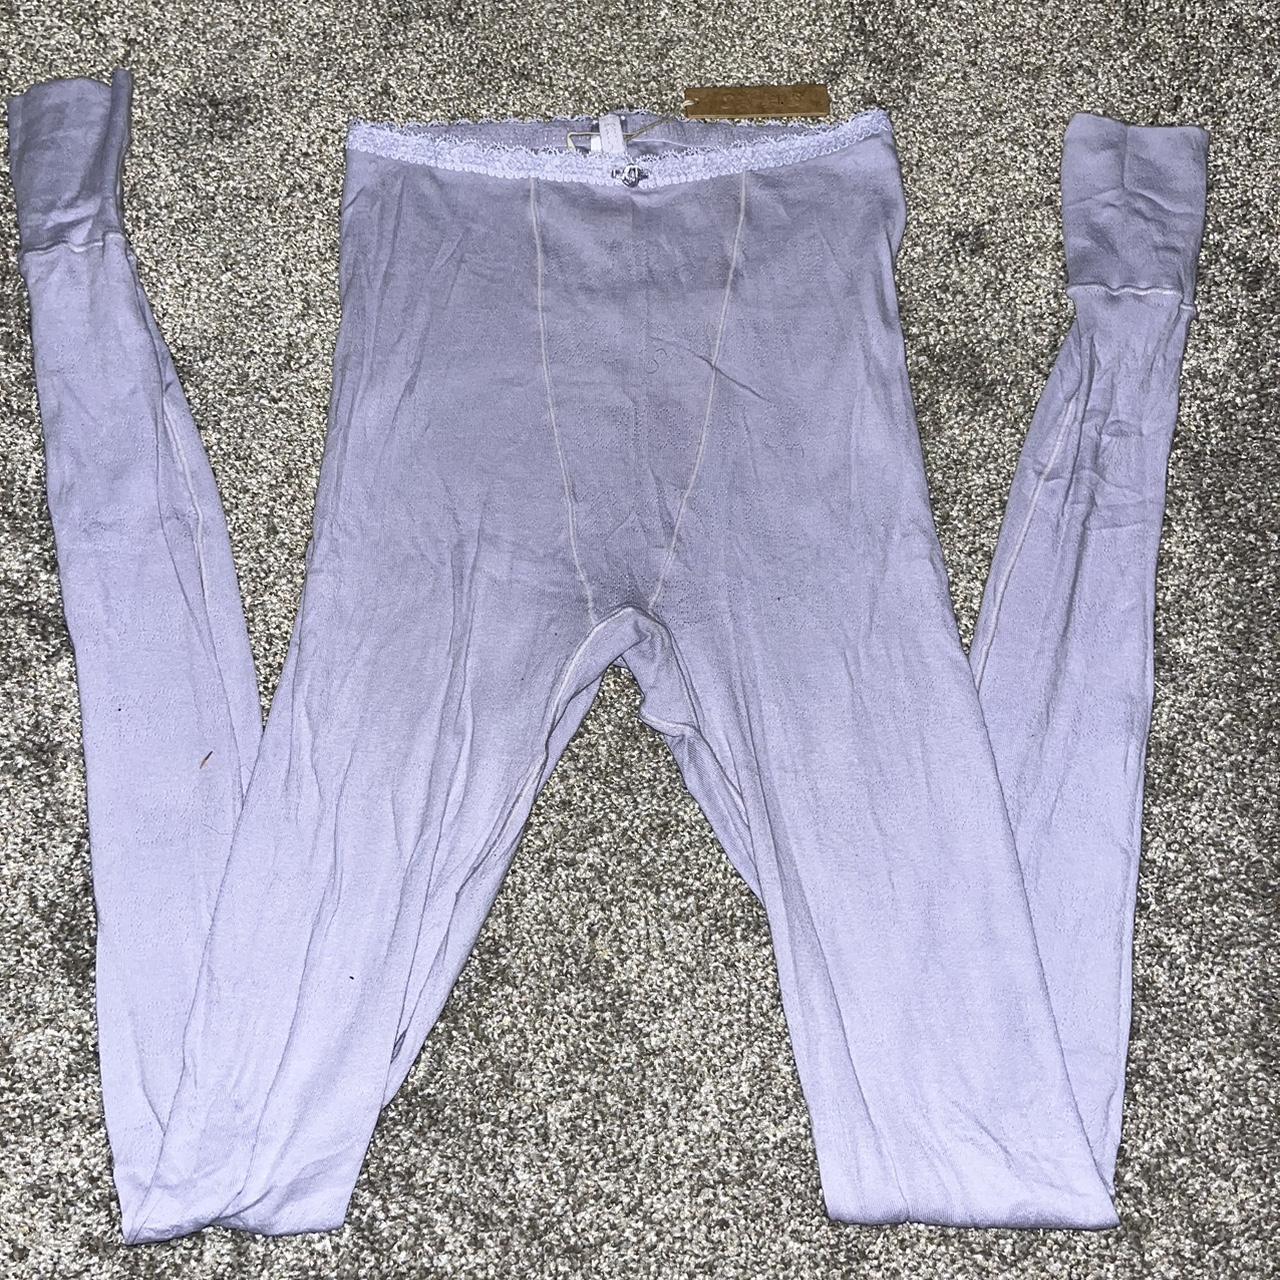 Skims Cotton Jersey Foldover pant in color Heather - Depop